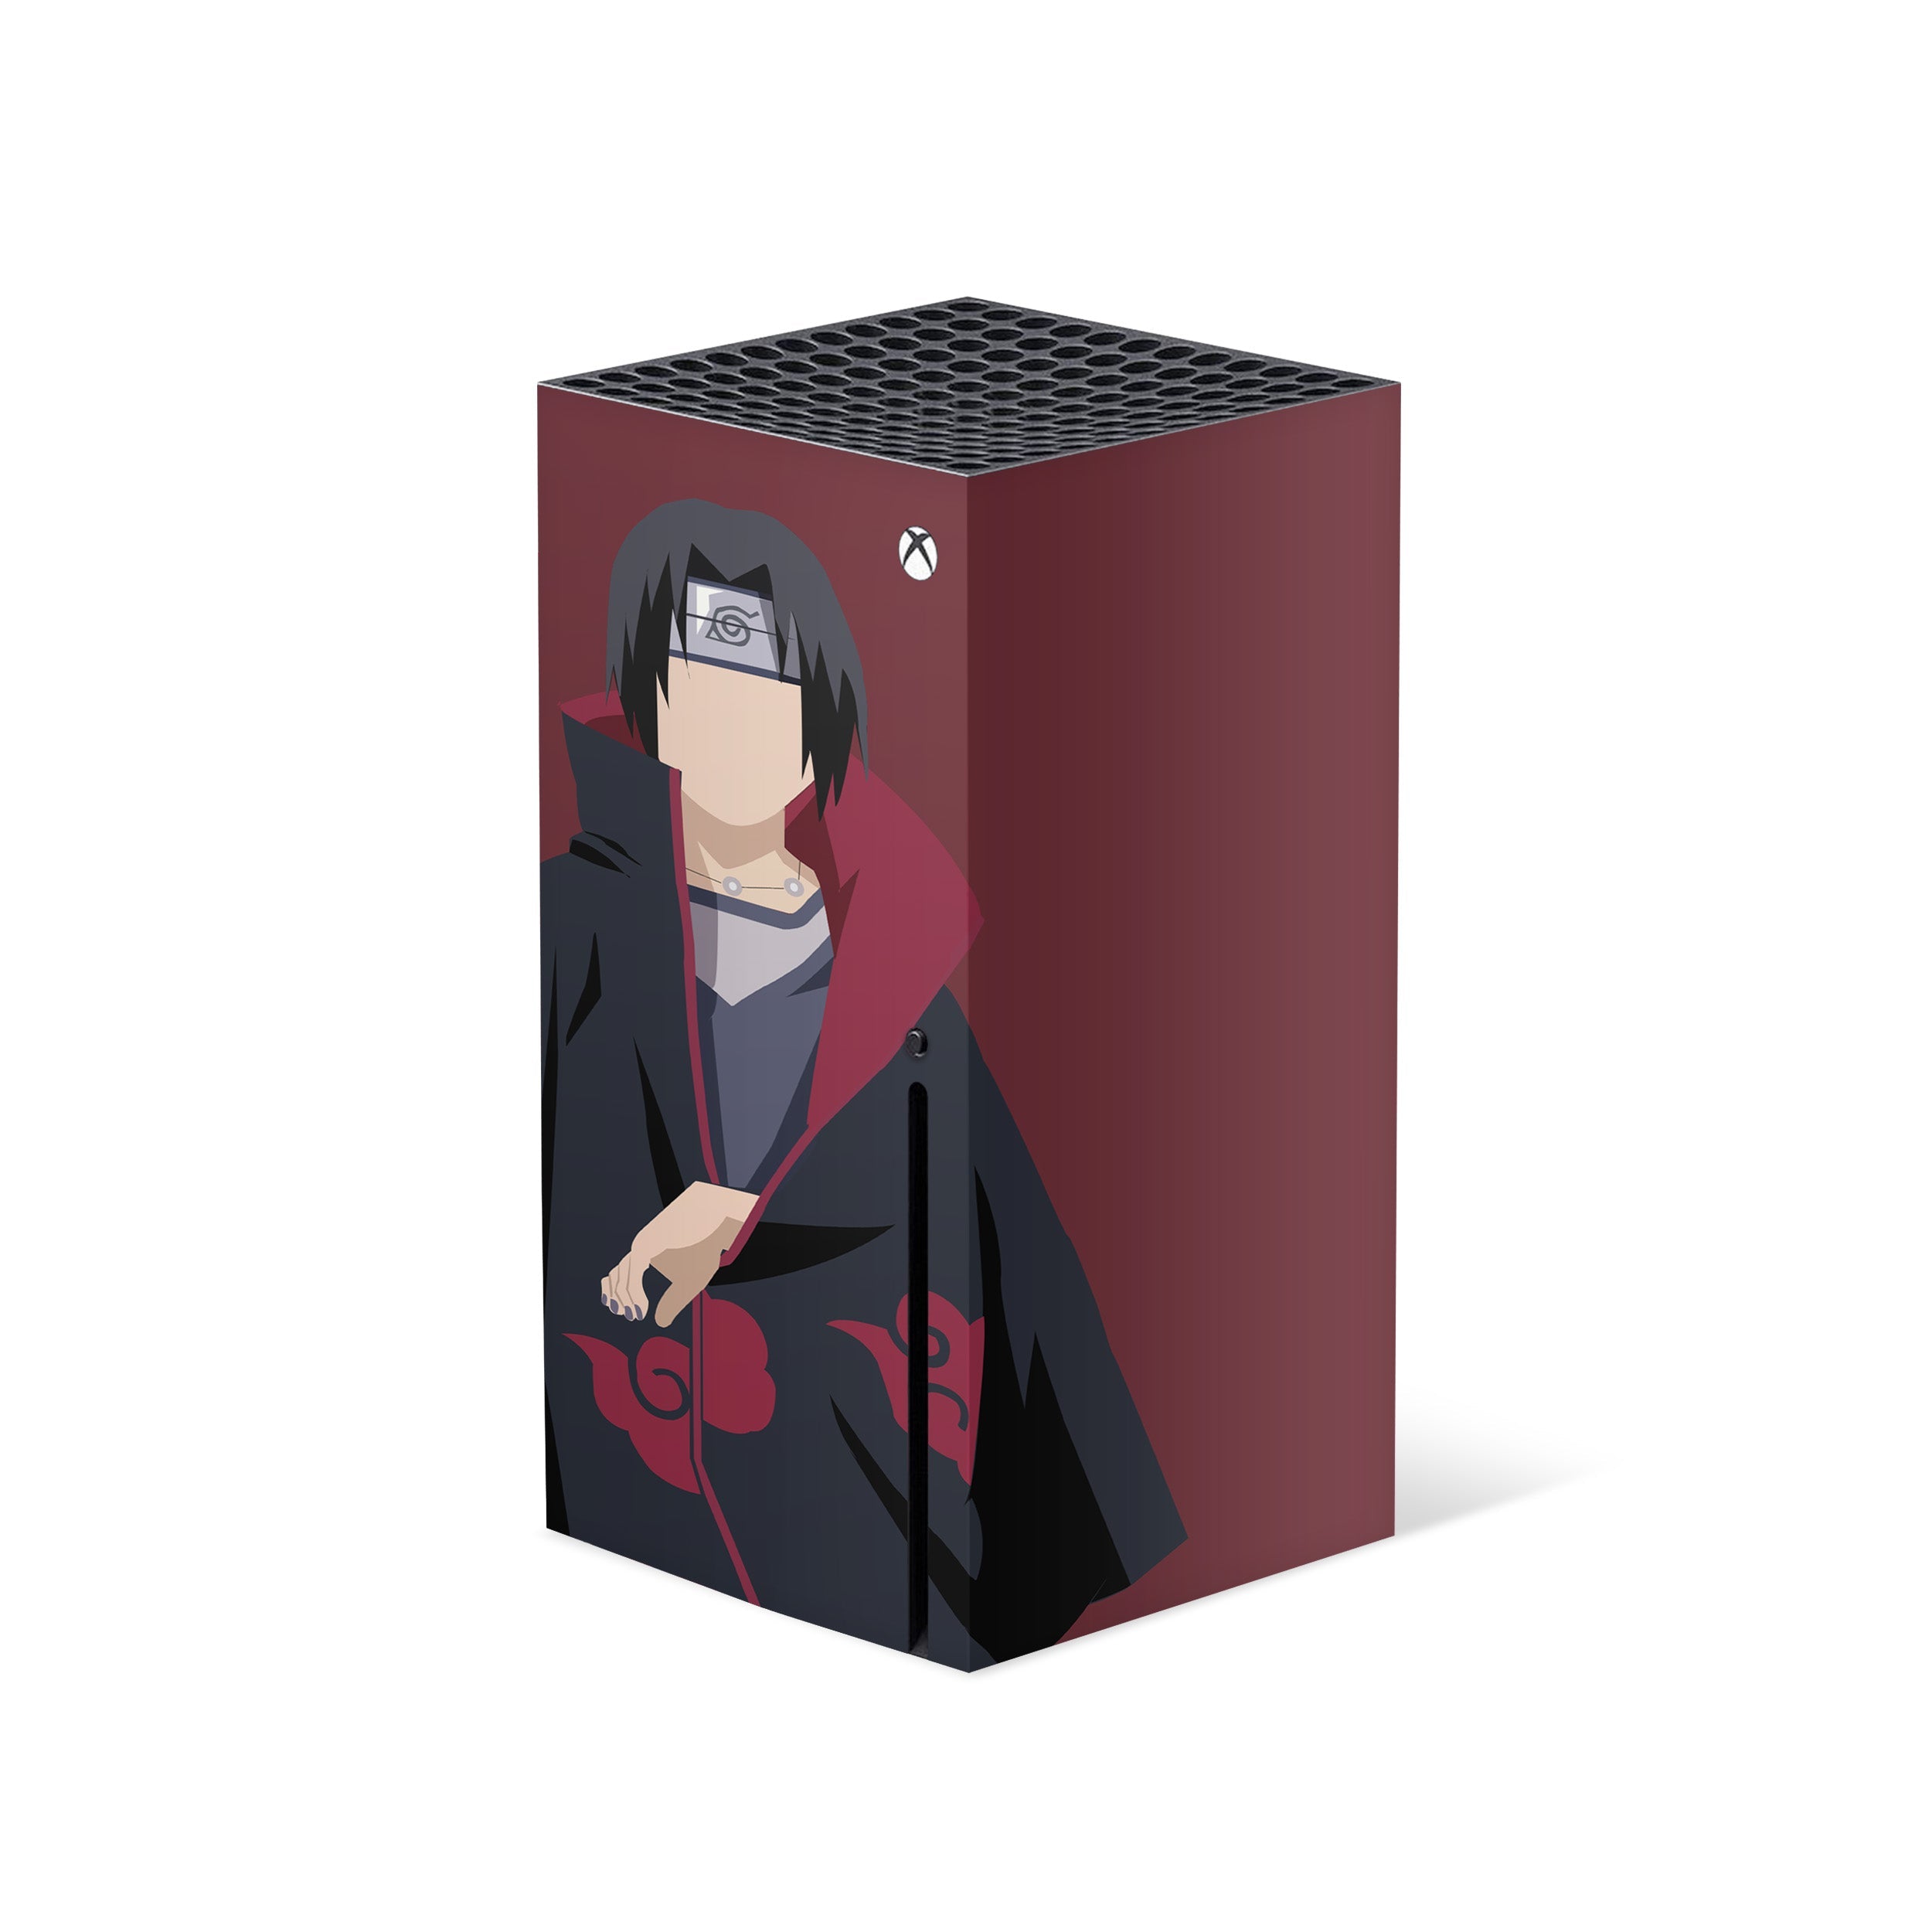 A video game skin featuring a Naruto Itachi design for the Xbox Series X.